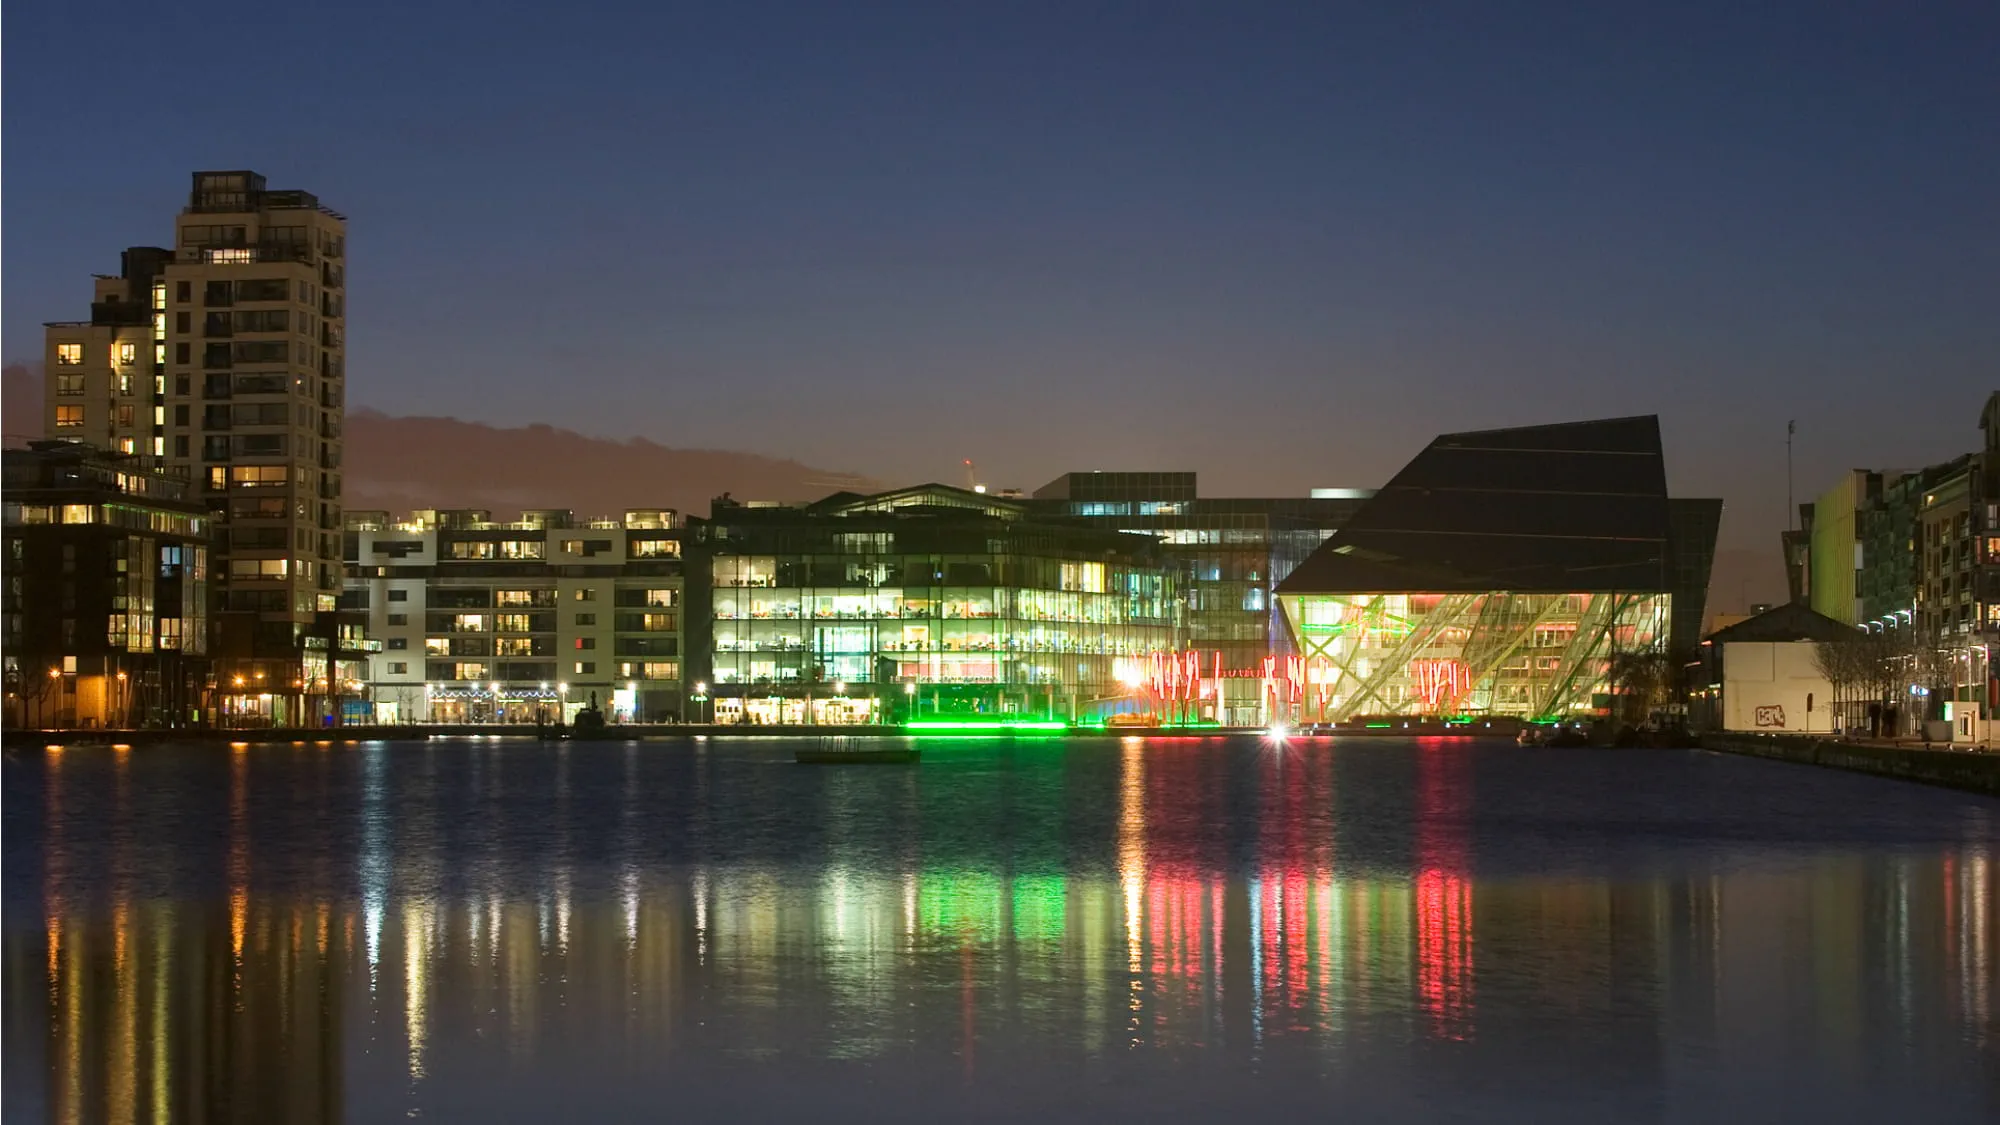 View of the Bord Gáis Energy Theatre and surrounding buildings on Grand Canal Dock, by night.